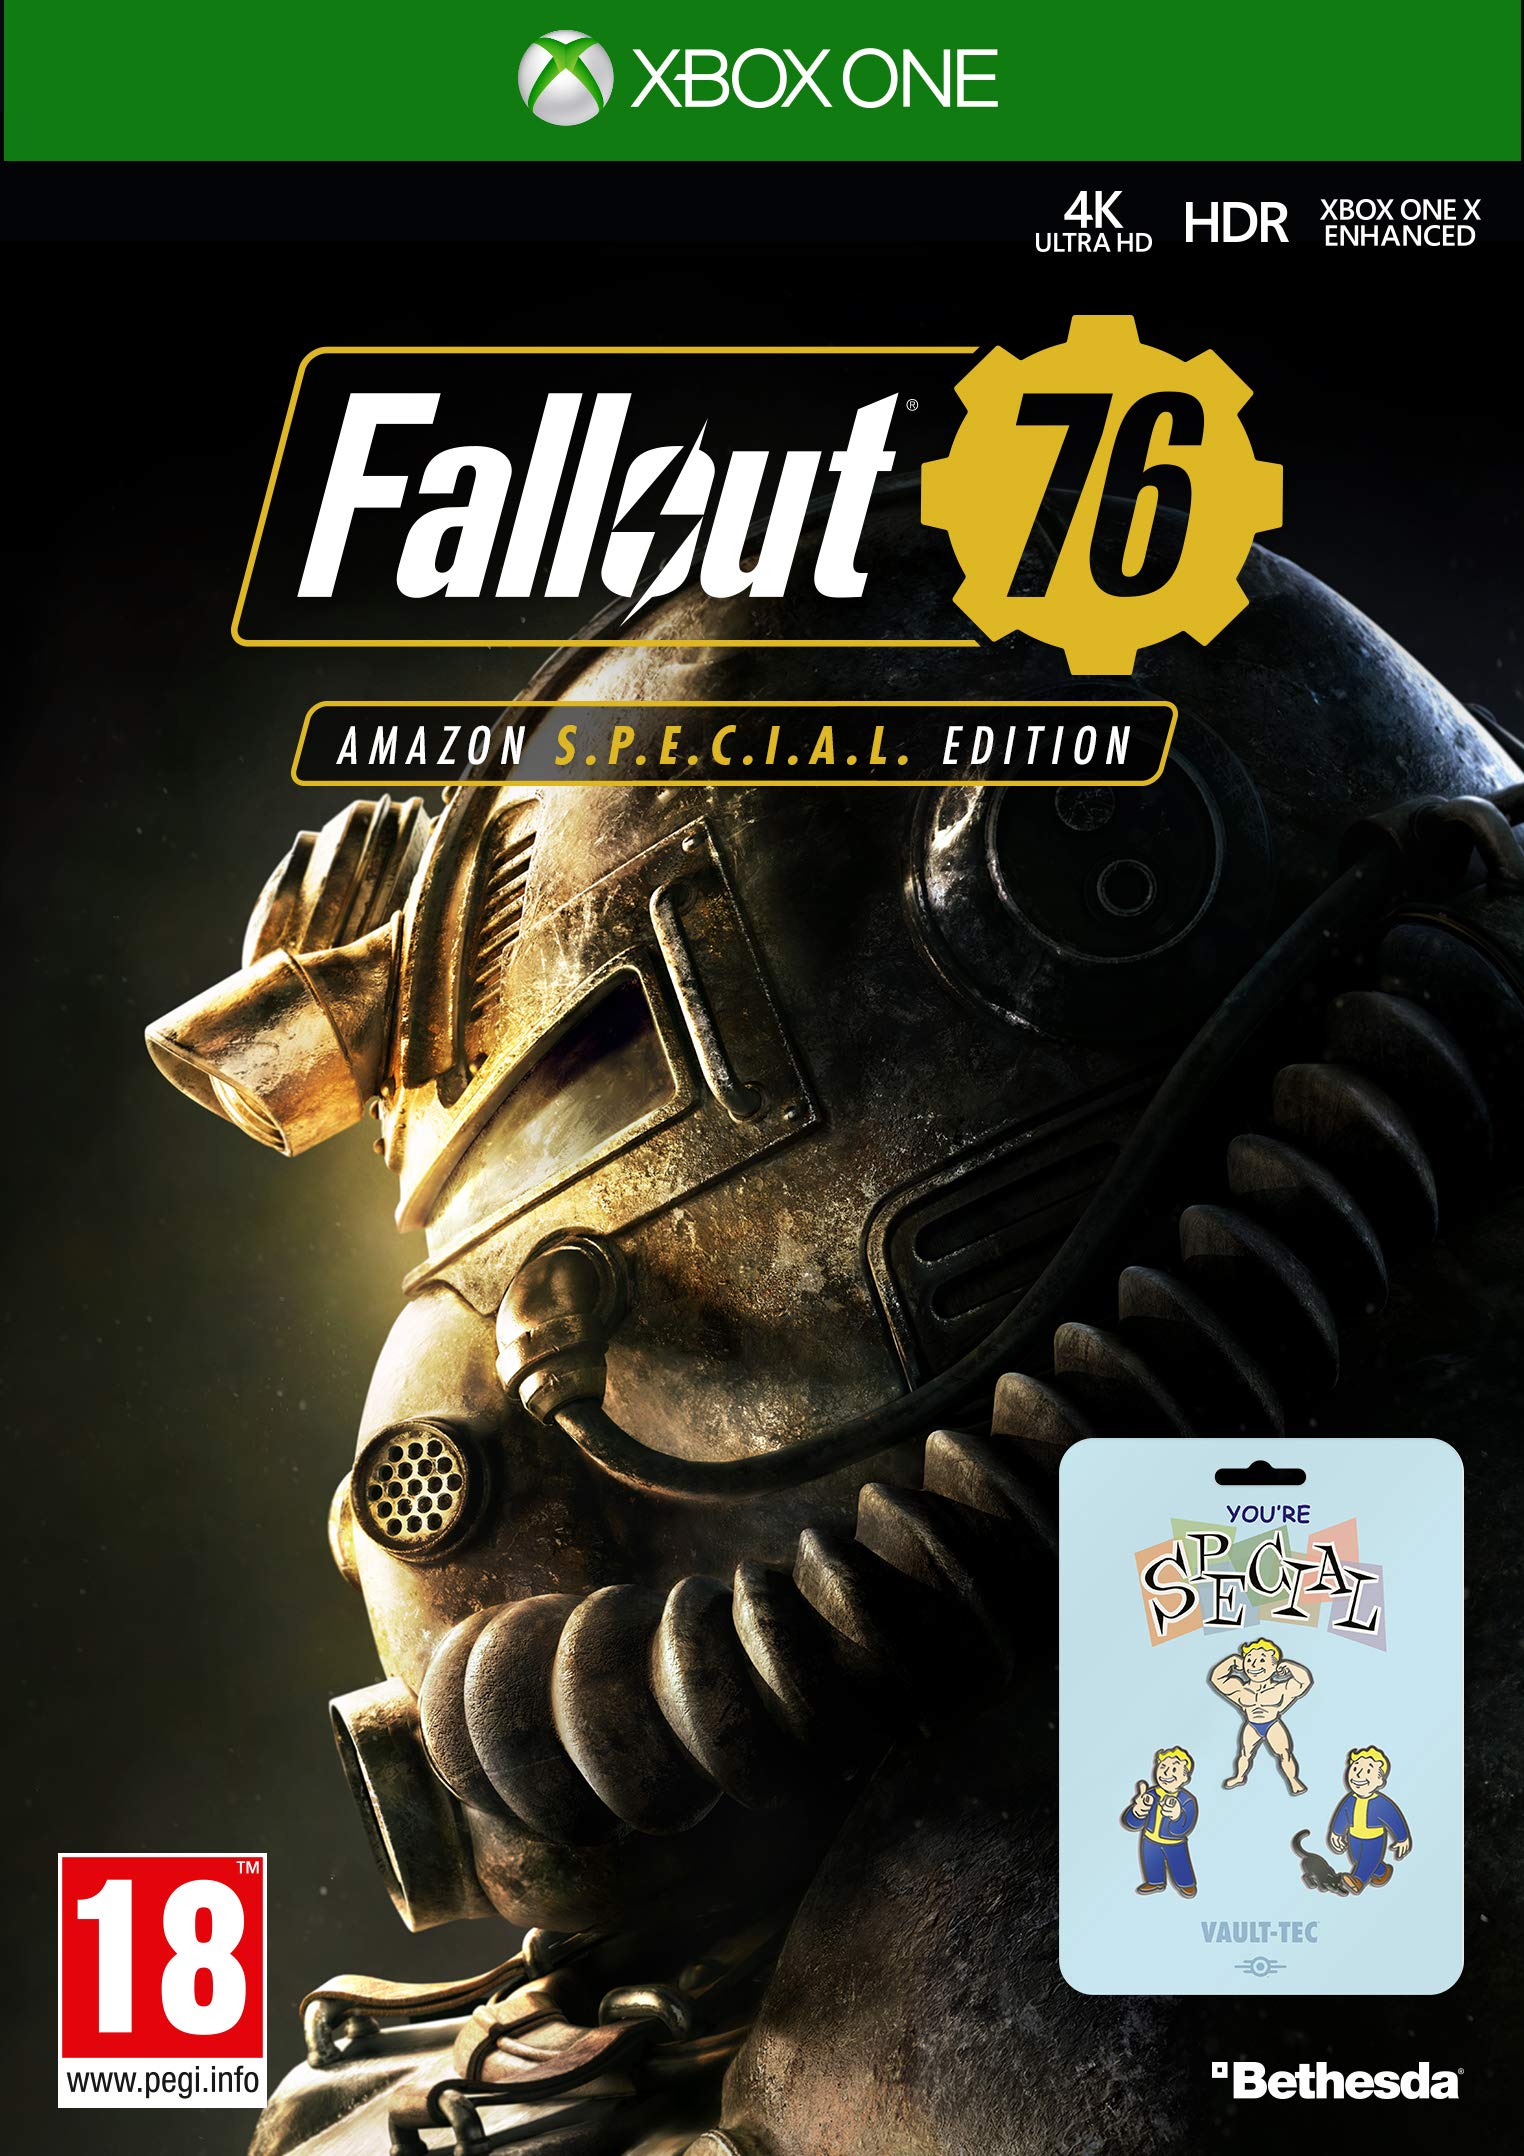 Amazon edition. Fallout 76 (ps4). Fallout Xbox. Fallout 76 диск ps4 российский. Fallout 76 Xbox one s.